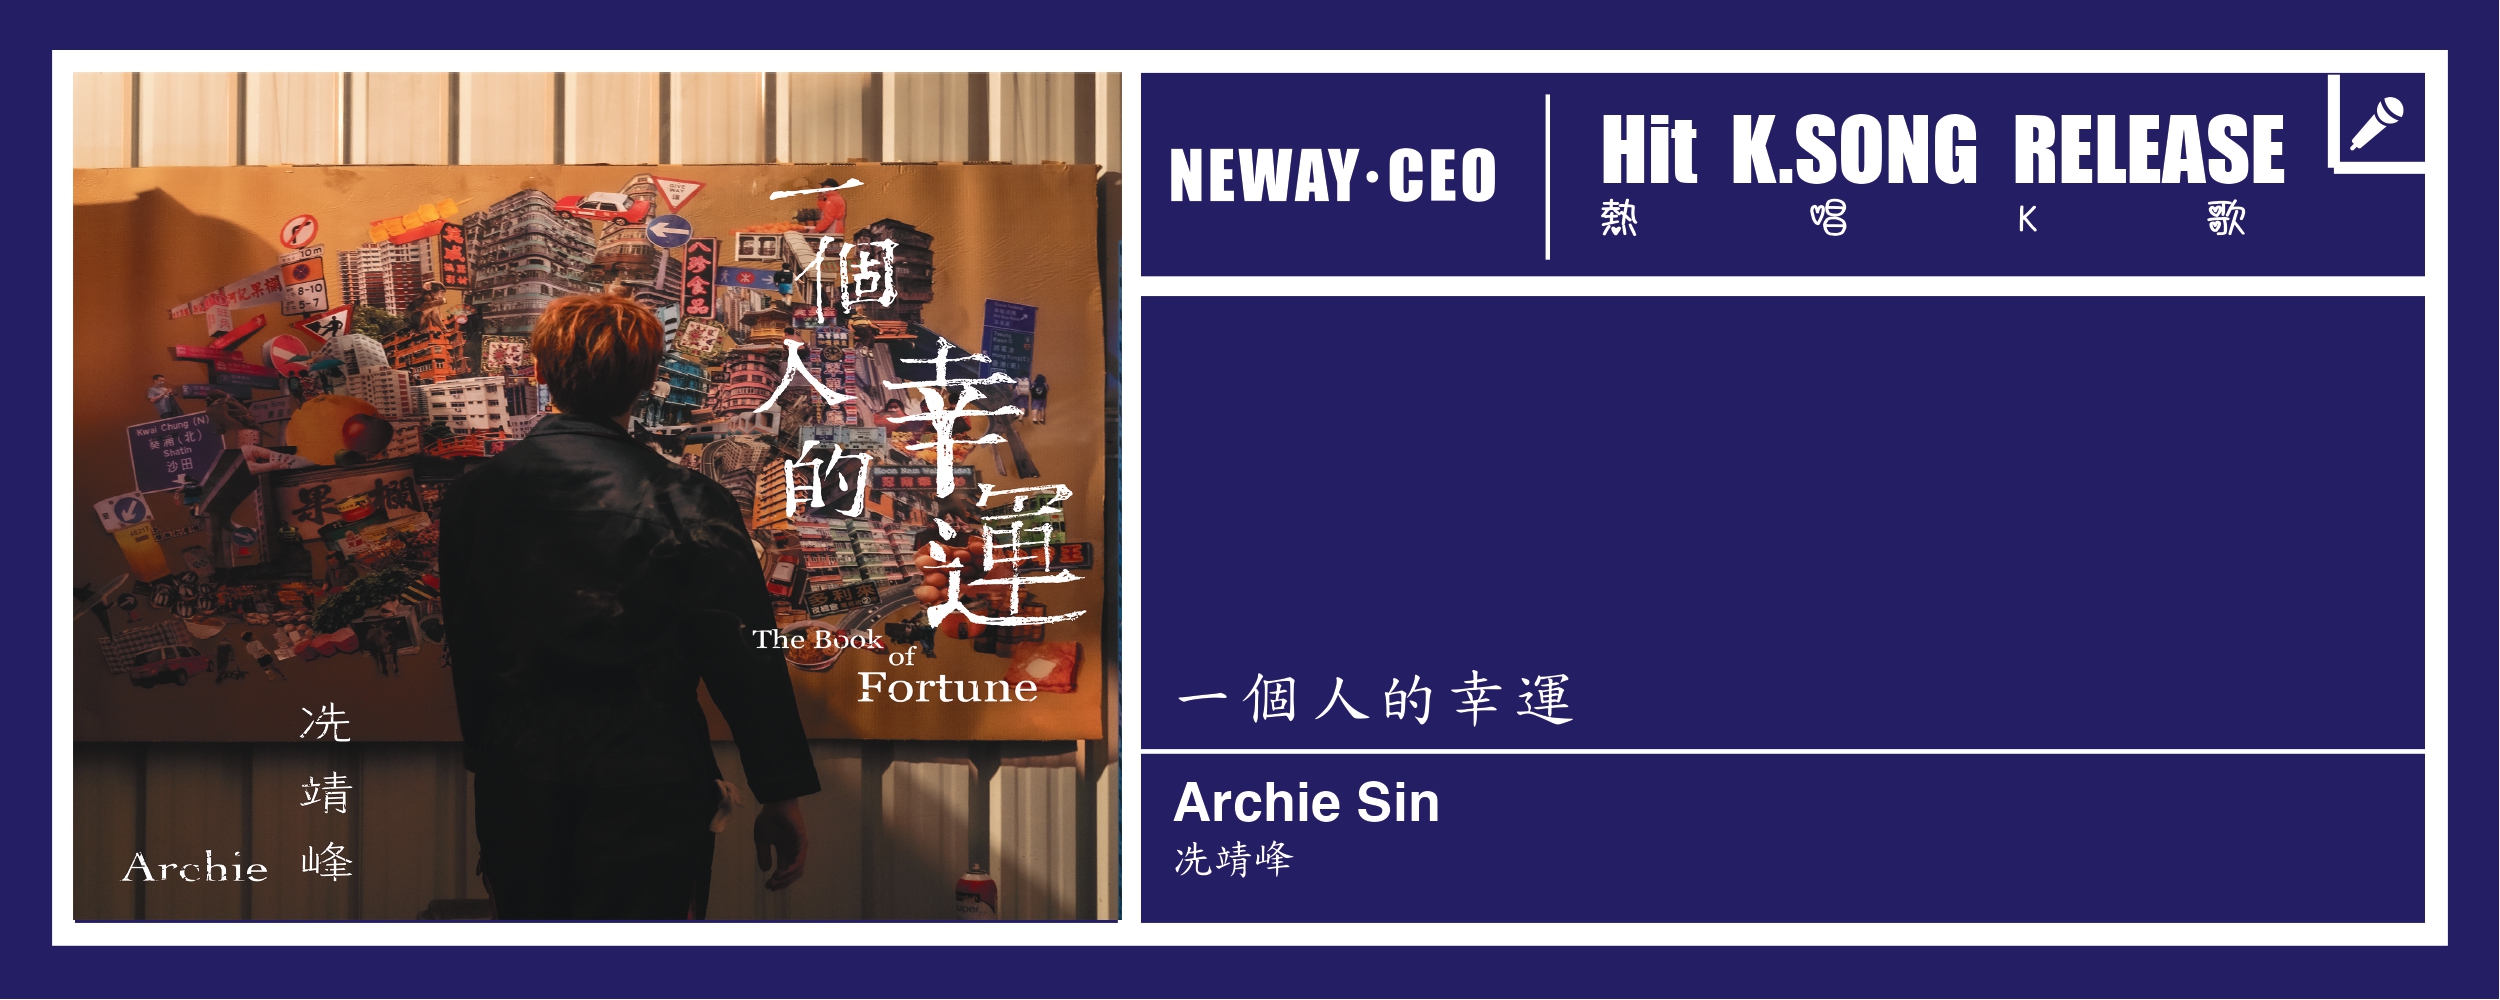 Neway New Release - Archie Siu